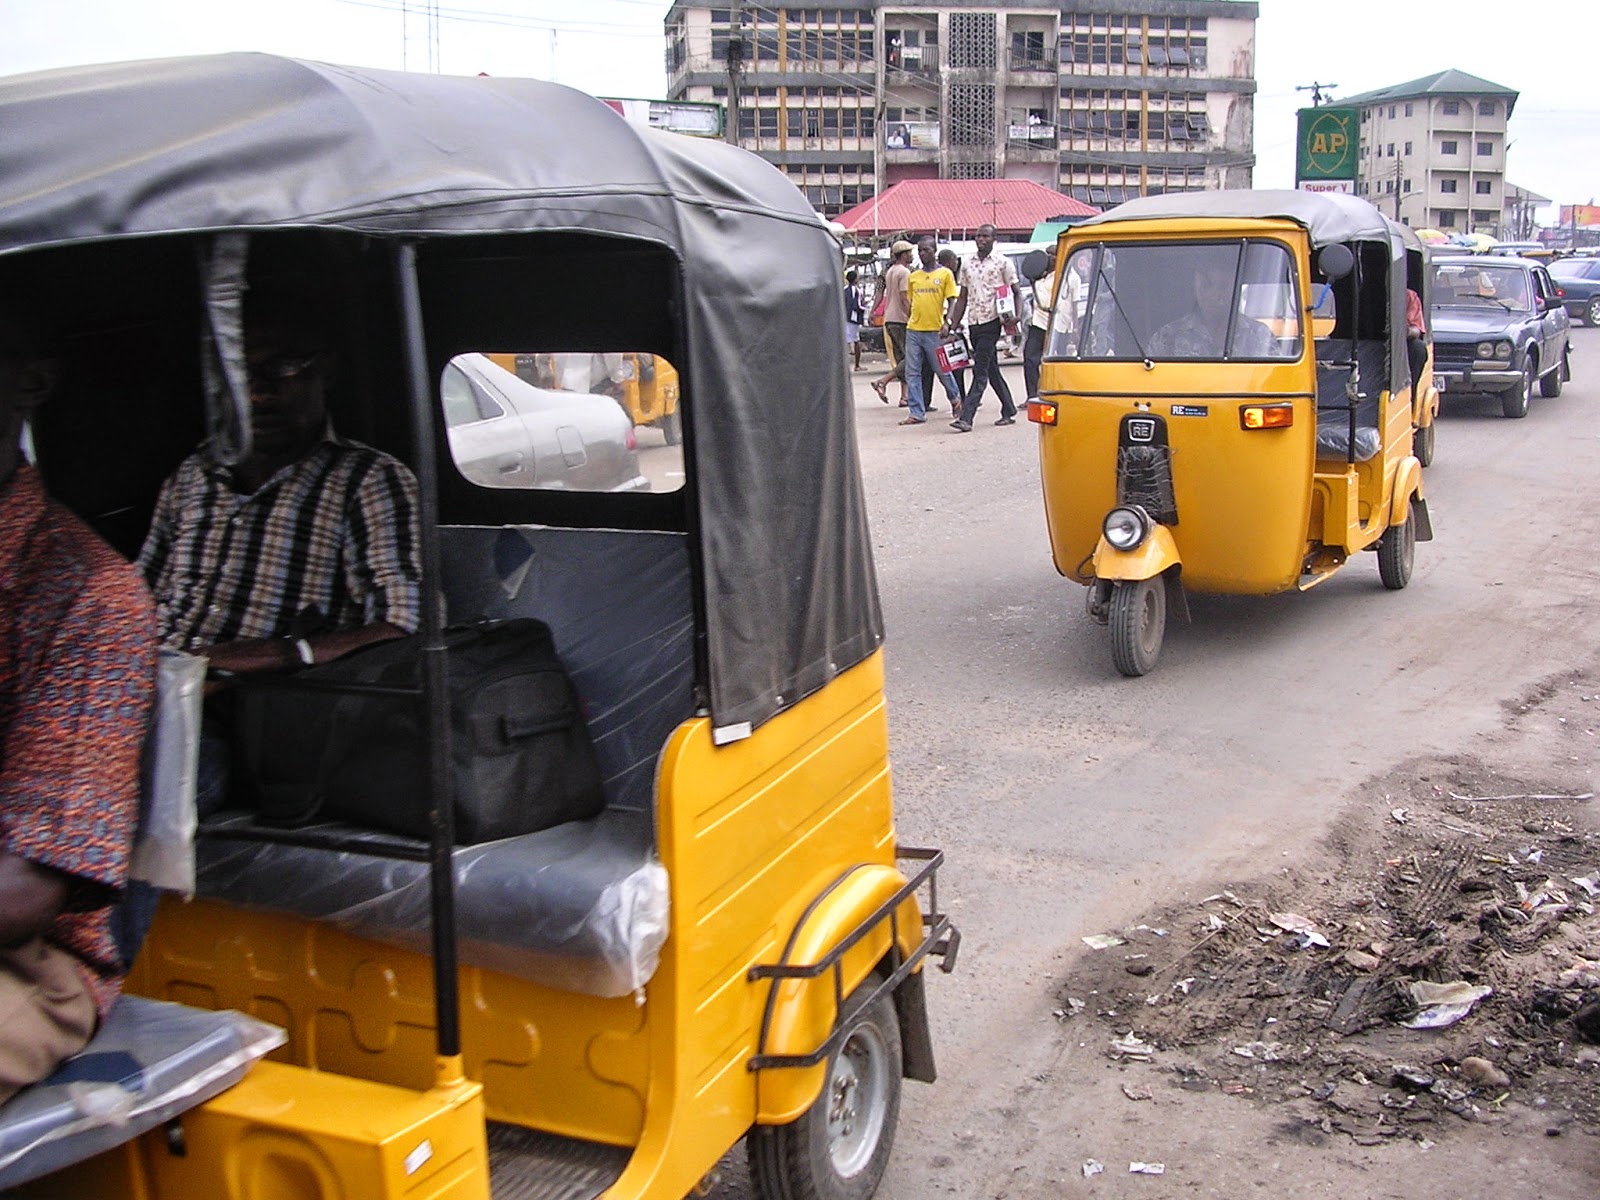 Two men inject tricycle owner to death, carry his motorcycle